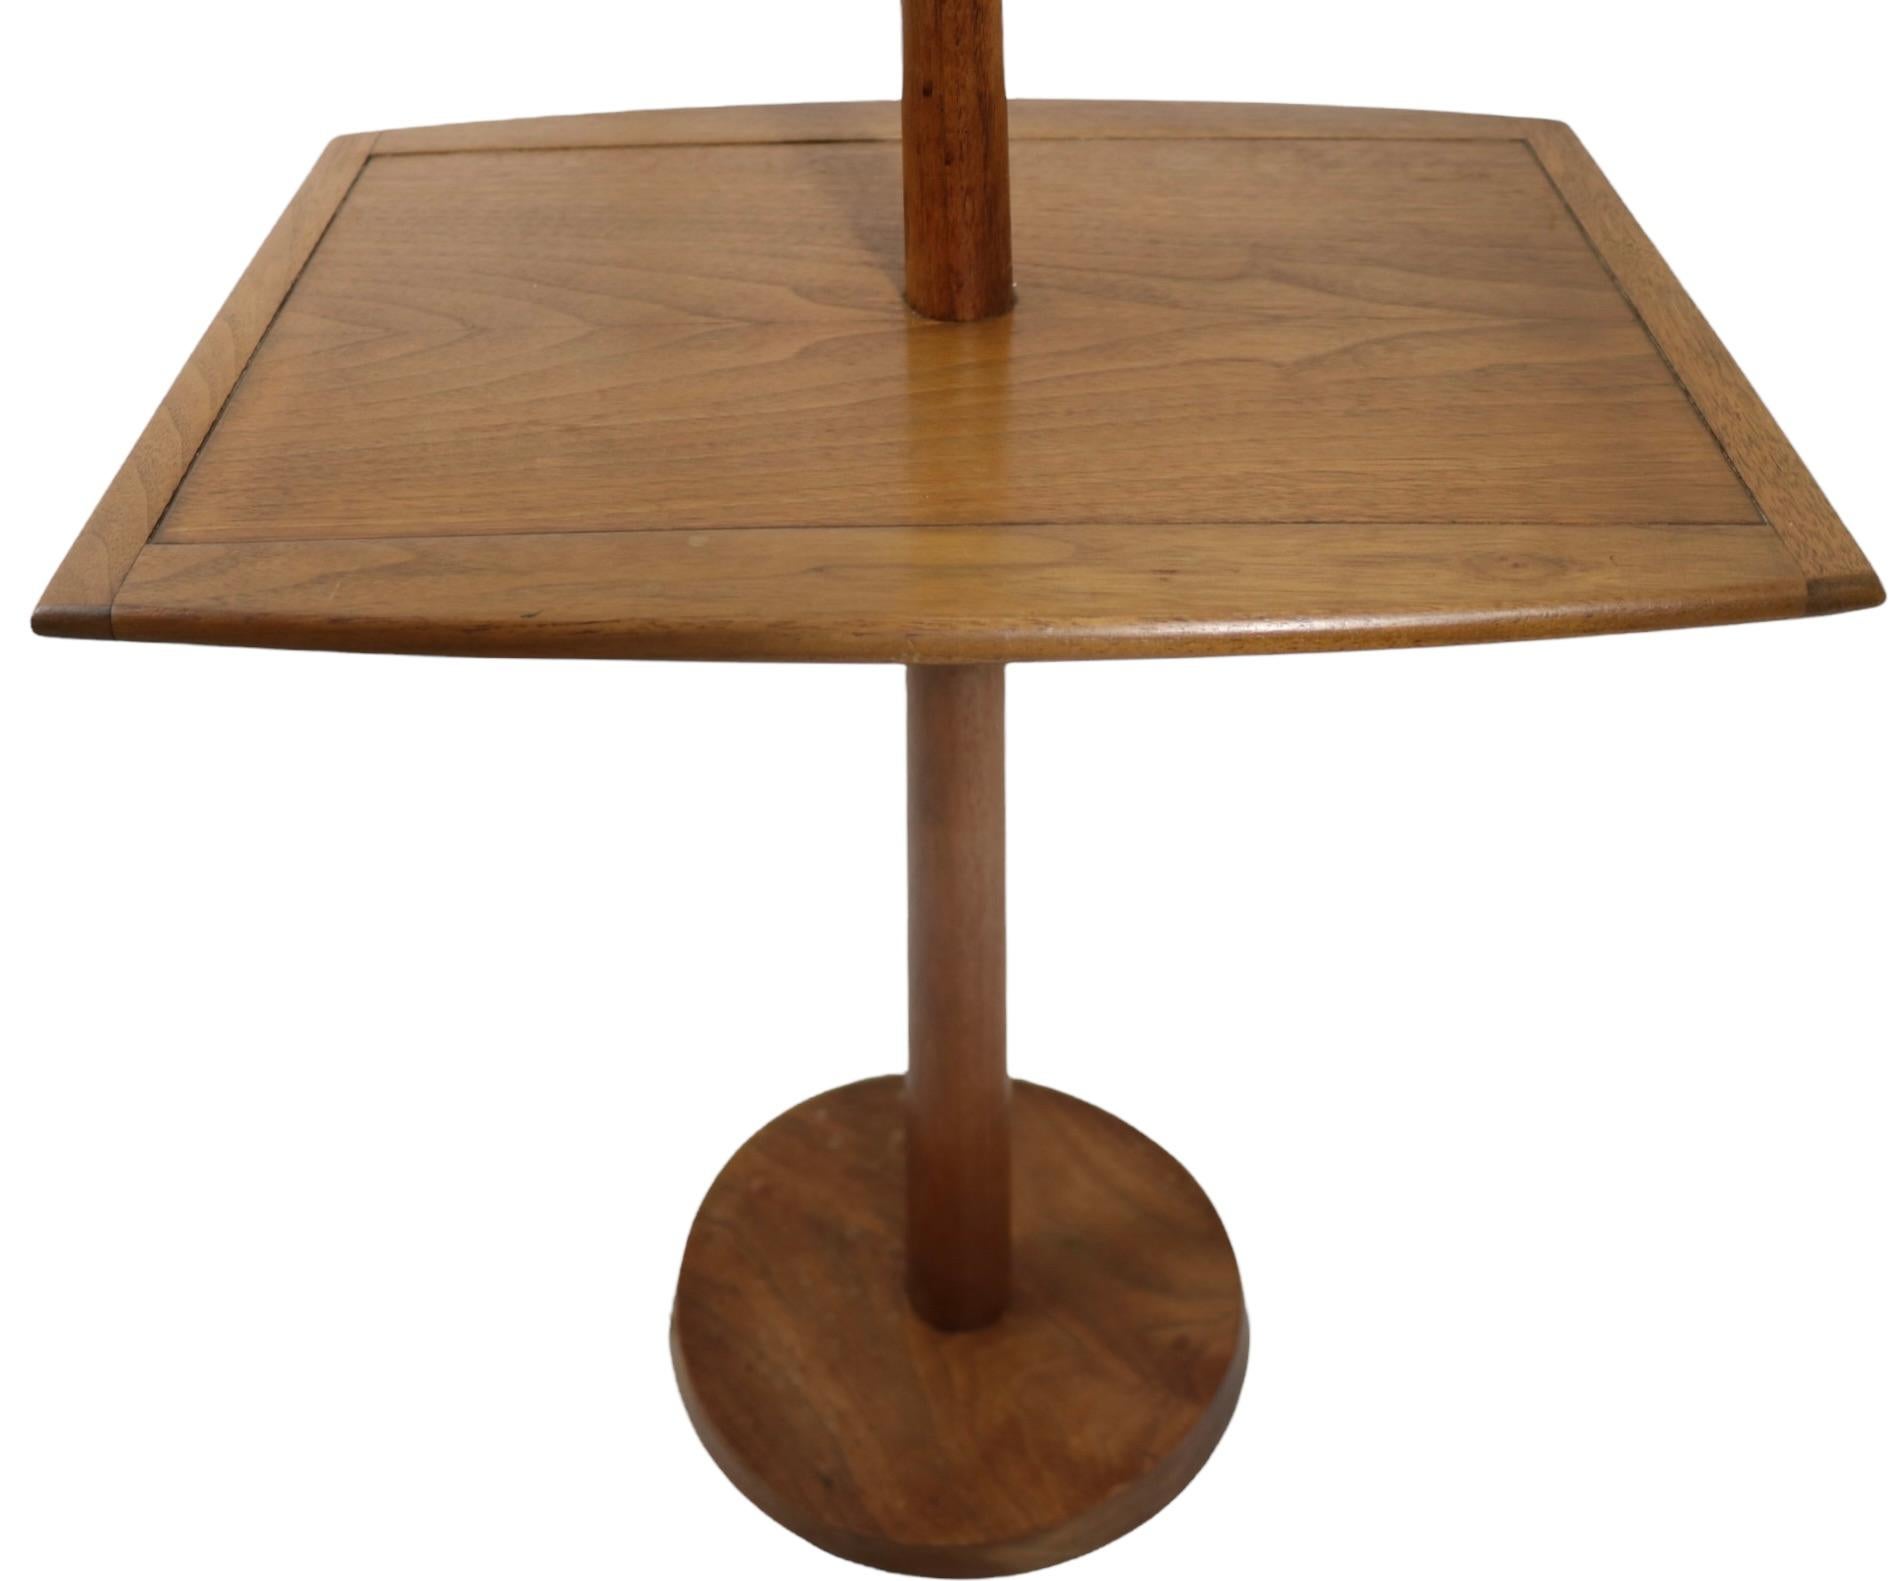 Cool architectural floor lamp with center table surface. The lamp is in very fine, original, clean, and working condition, showing only inconsequential cosmetic wear to finish at base ( see images ). 
 Sculptural elongated form, having a shaped